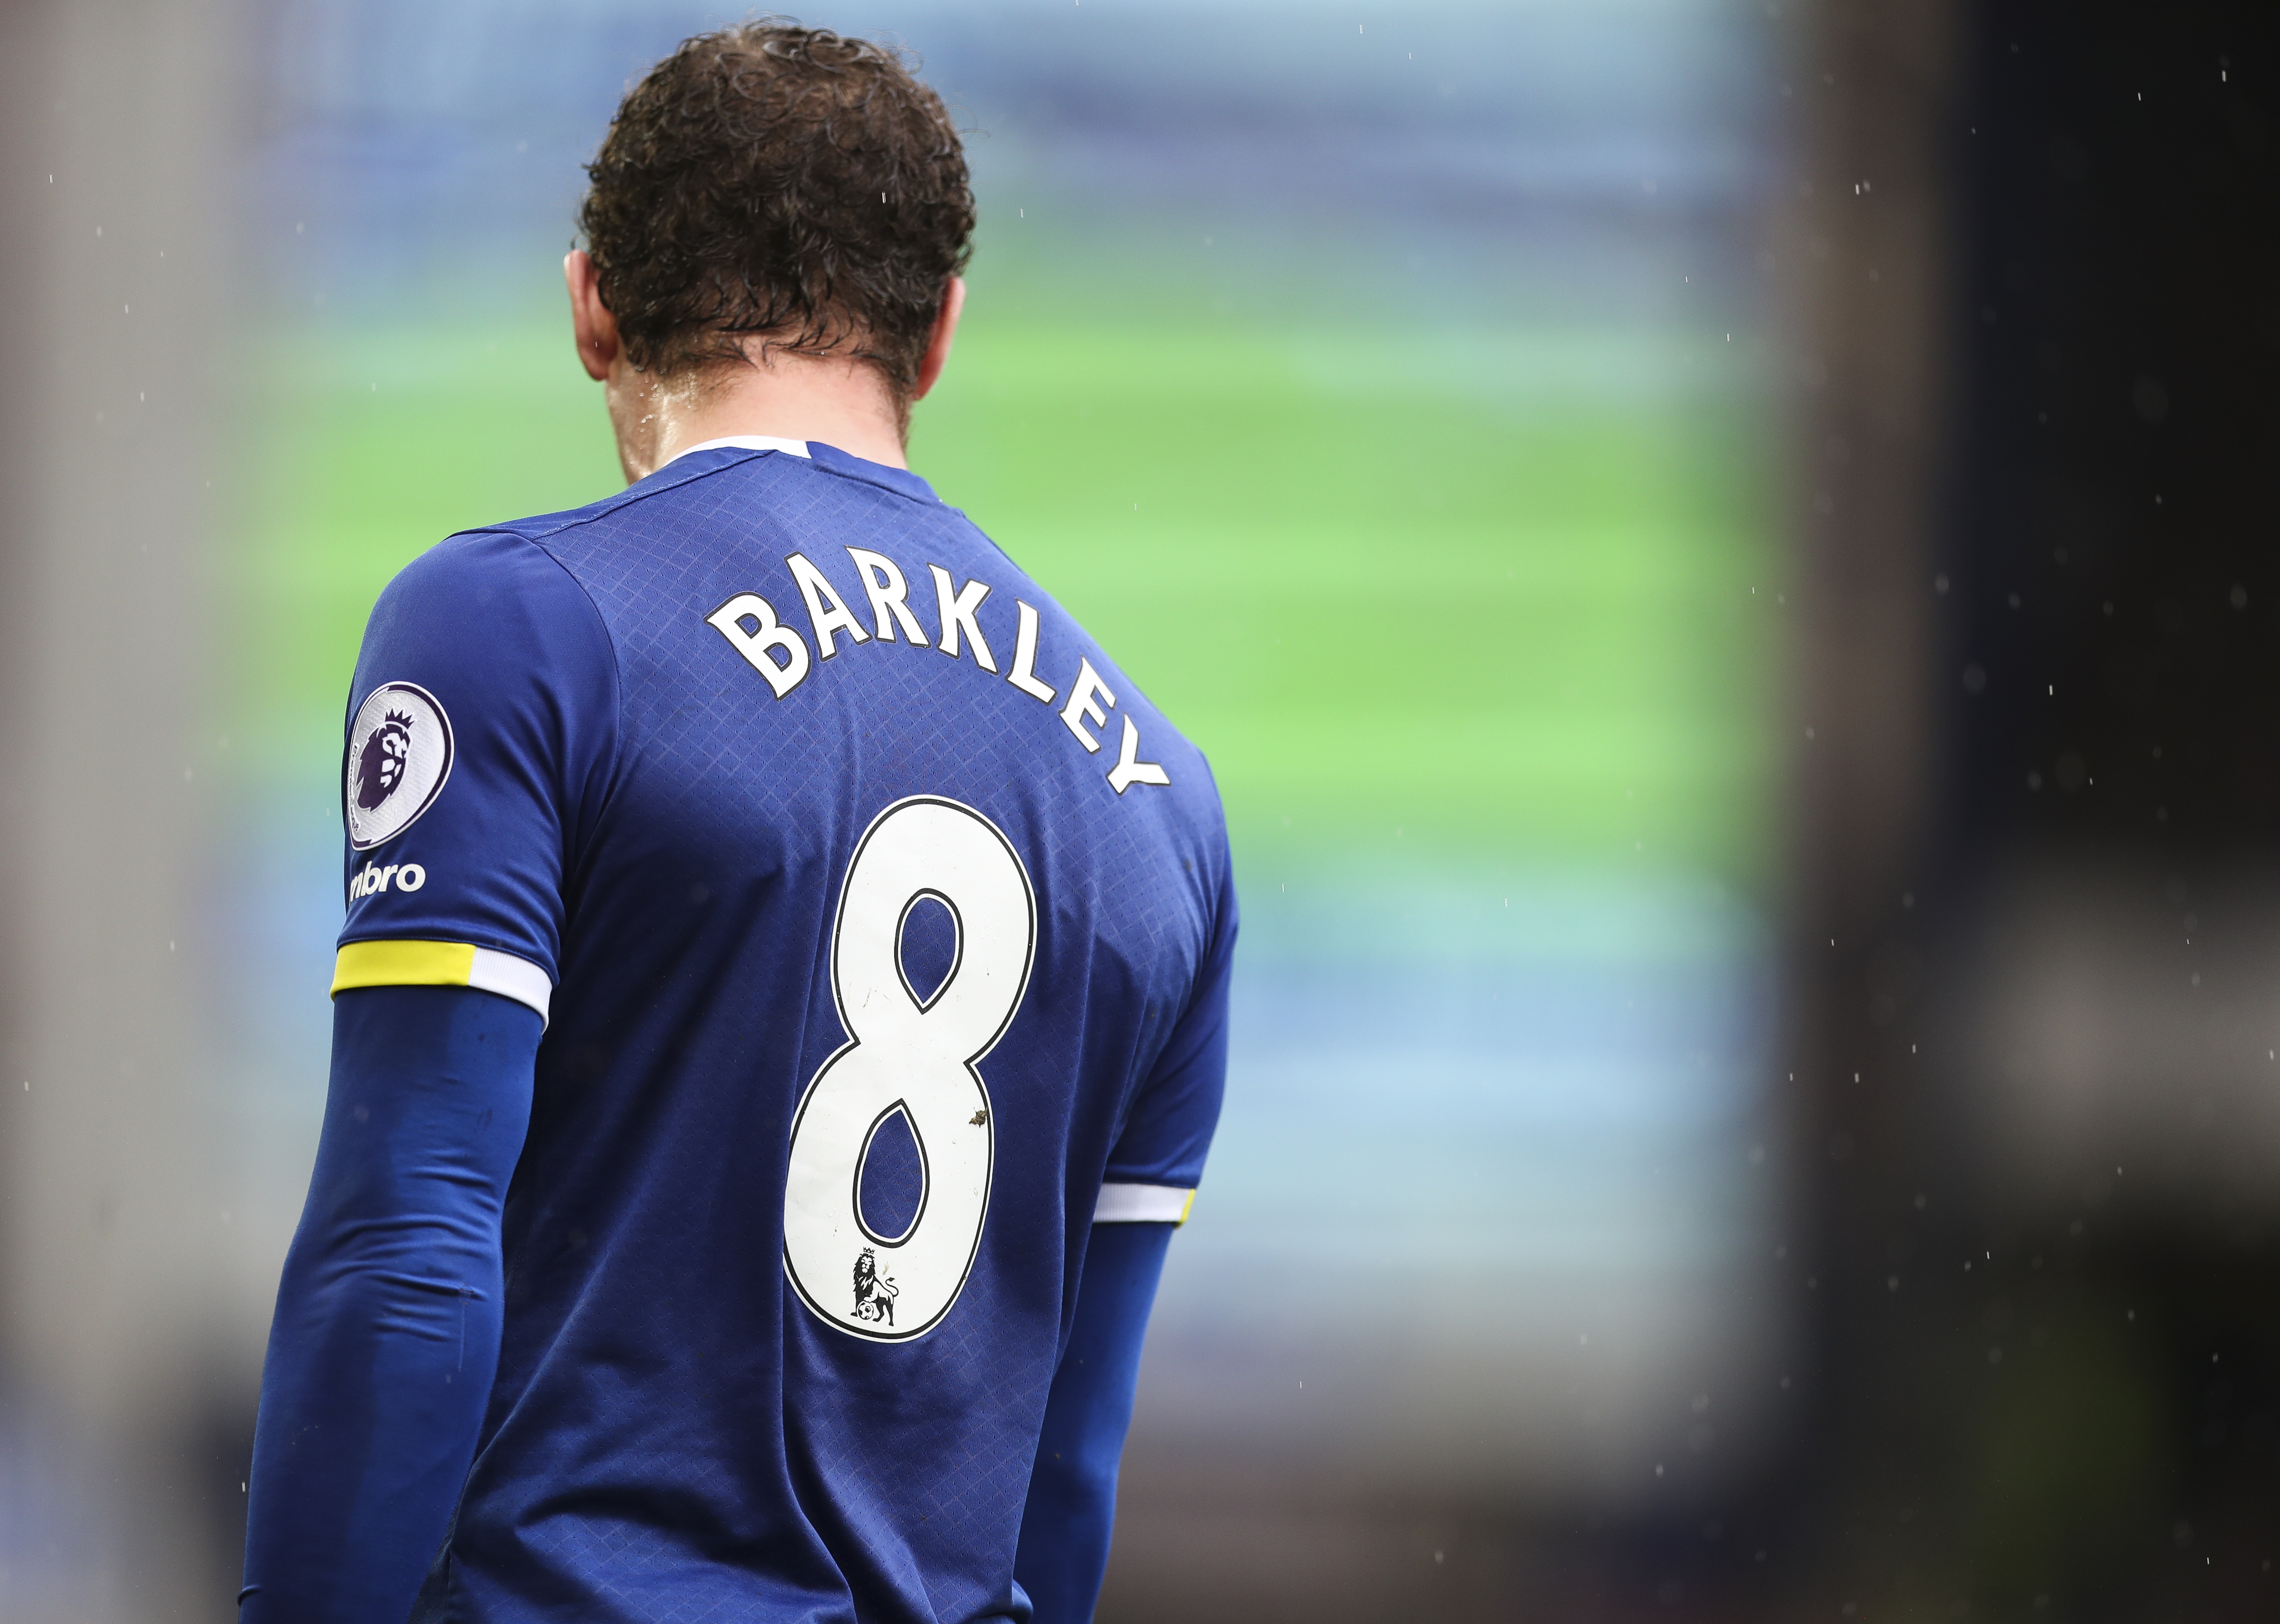 LIVERPOOL, ENGLAND - MARCH 18: Ross Barkley of Everton during the Premier League match between Everton and Hull City at Goodison Park on March 18, 2017 in Liverpool, England. (Photo by Mark Robinson/Getty Images)